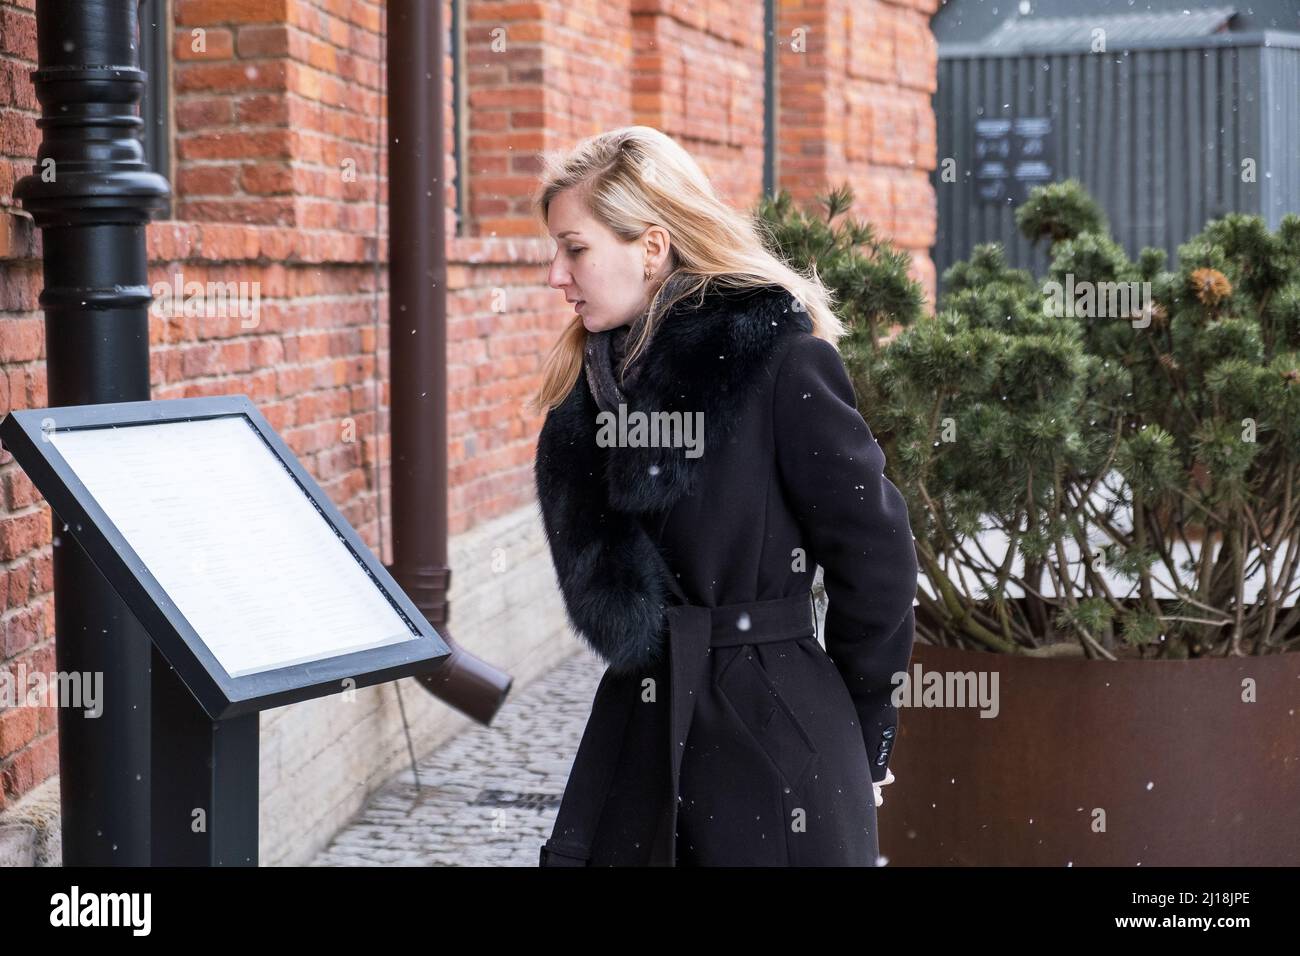 Young blonde woman in black winter coat with fur collar reads menu Stock Photo